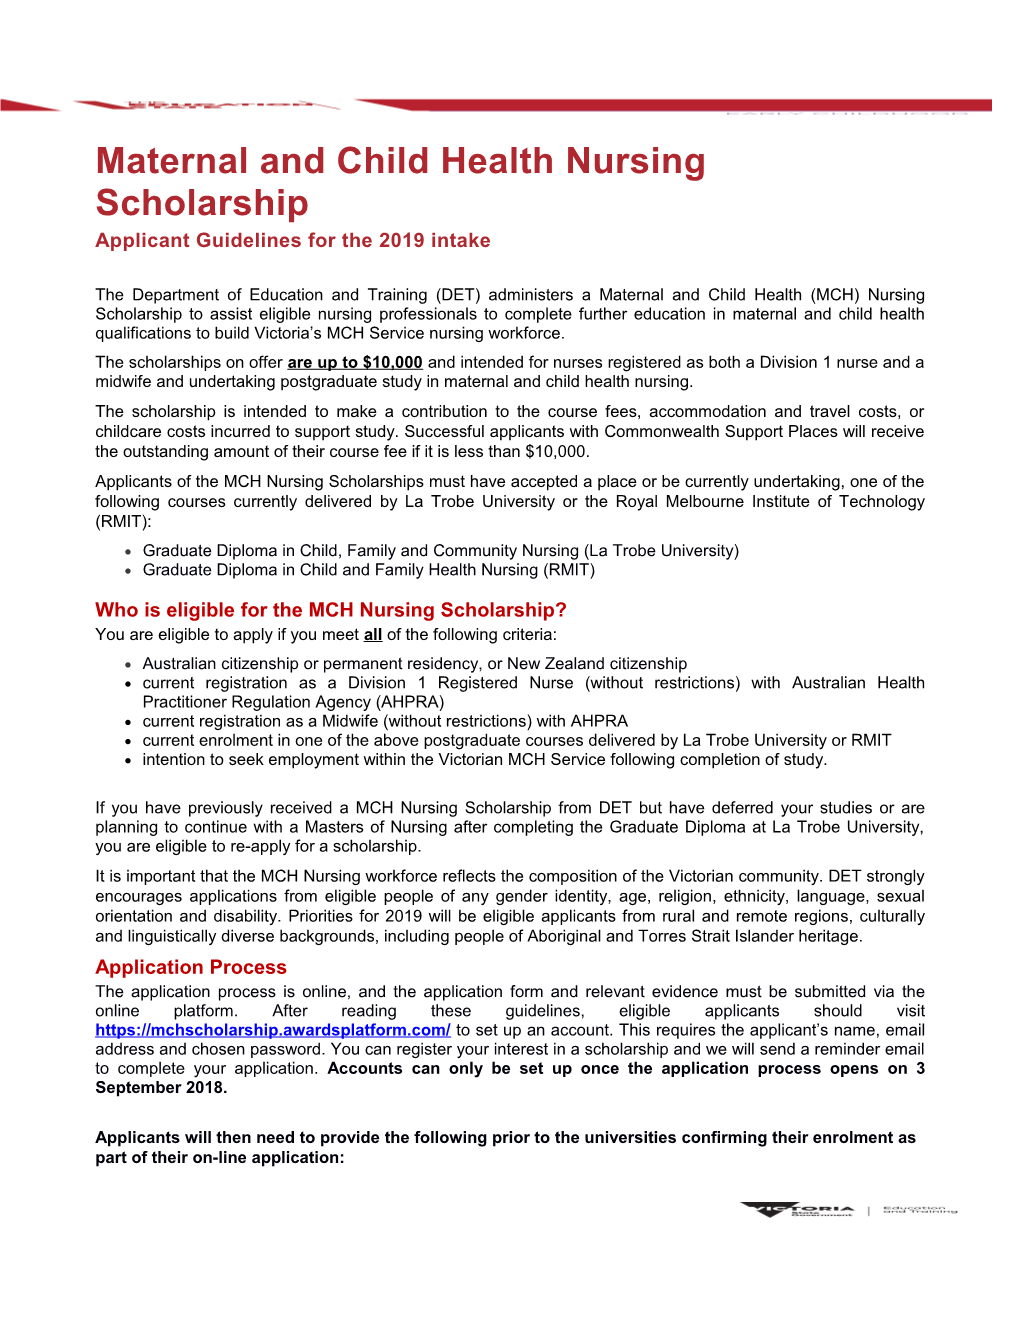 Maternal and Child Health Nursing Scholarship Applicant Guidelines for the 2019 Intake